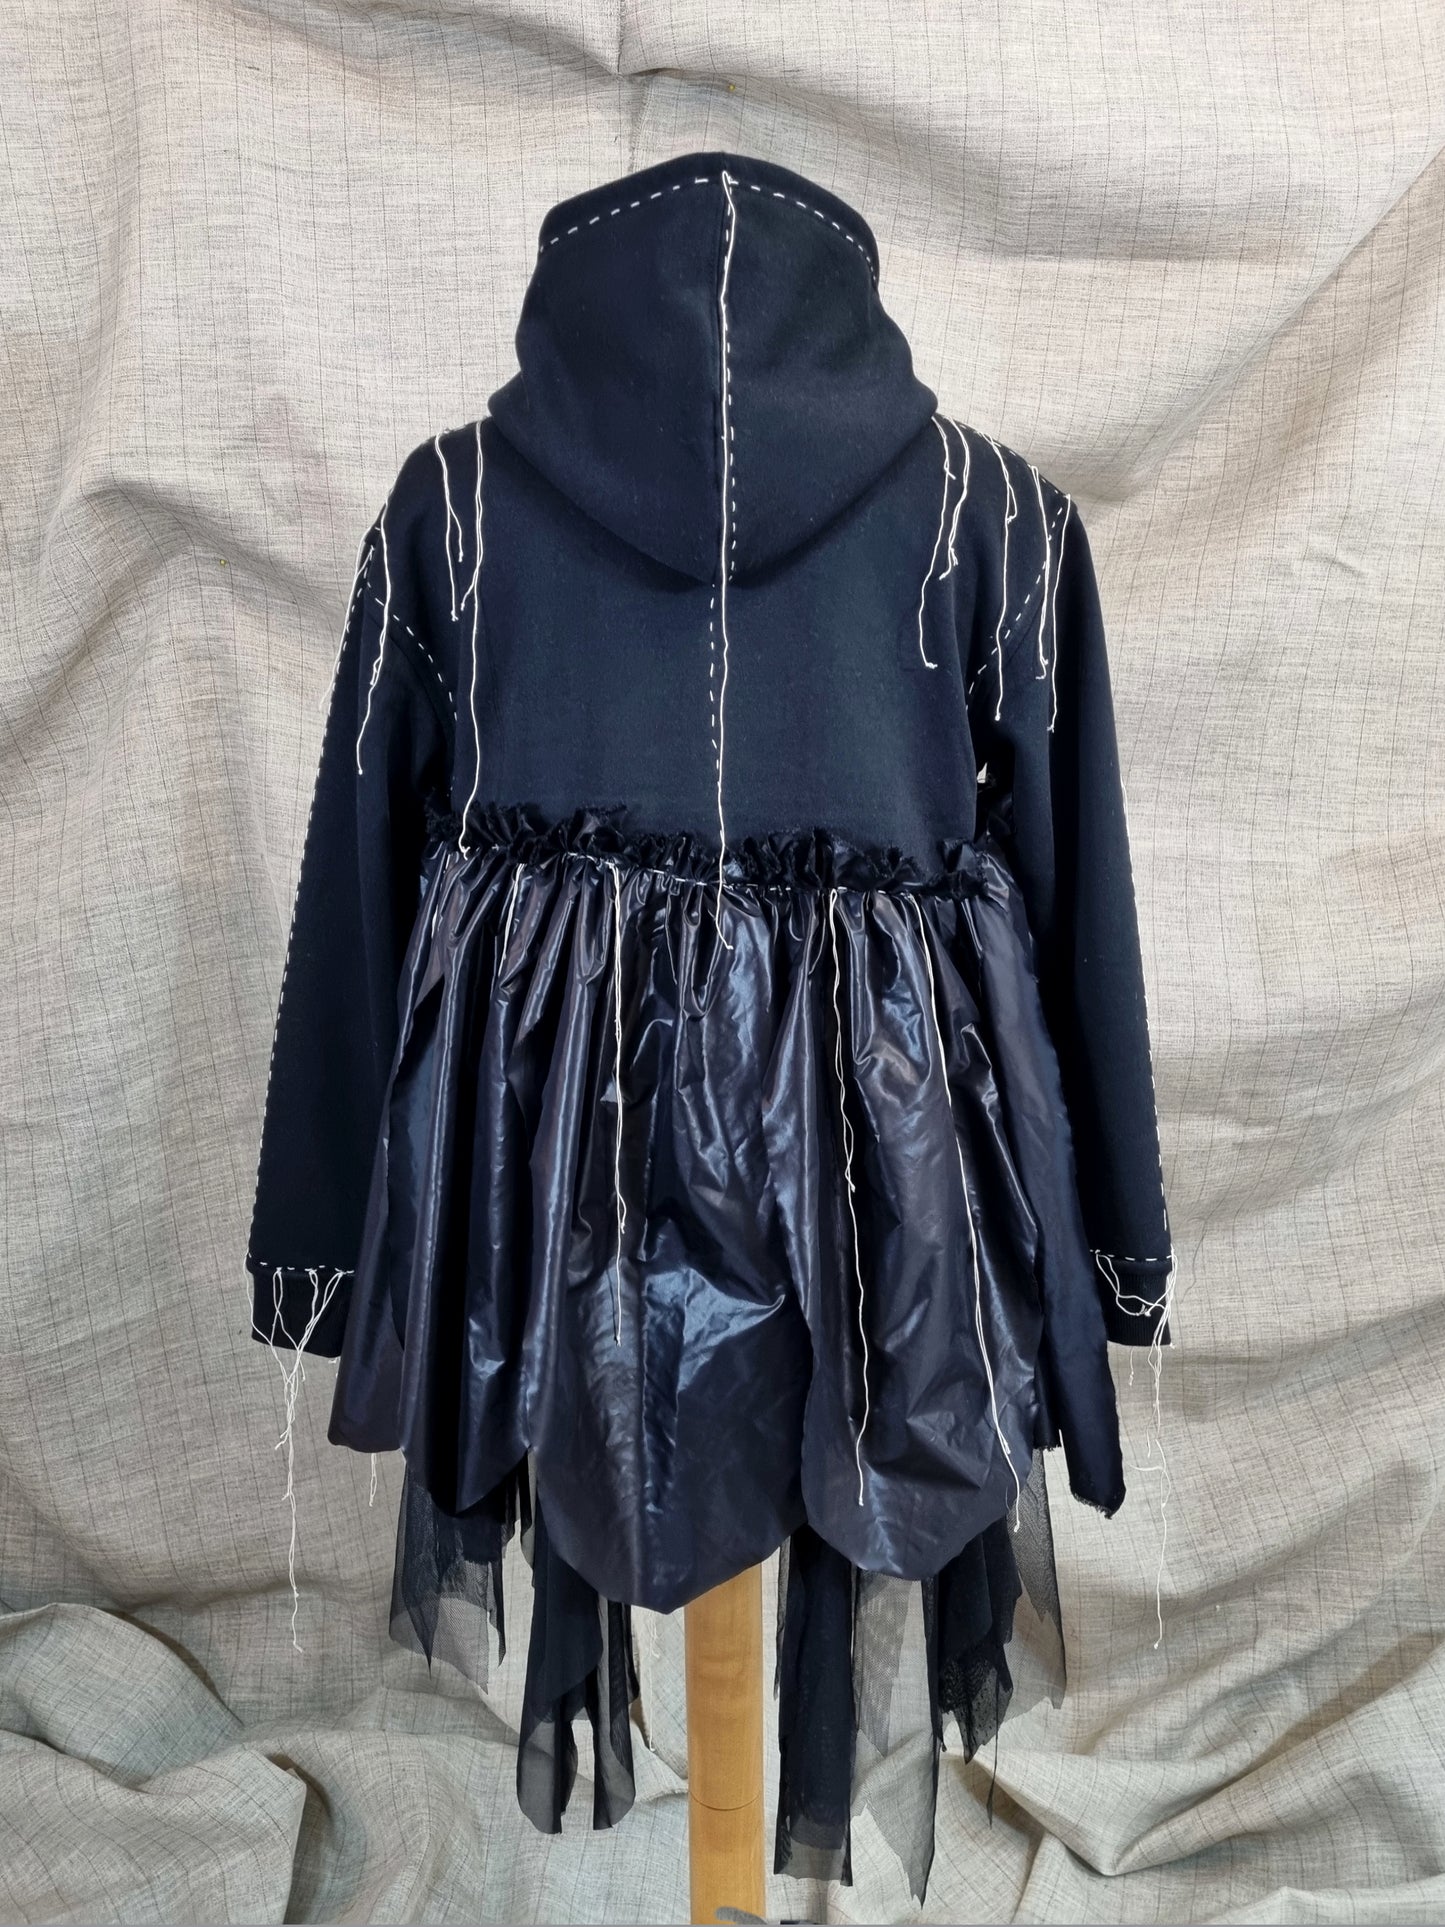 Black Zip-Up Hoodie With Threads And Fabric Inserts